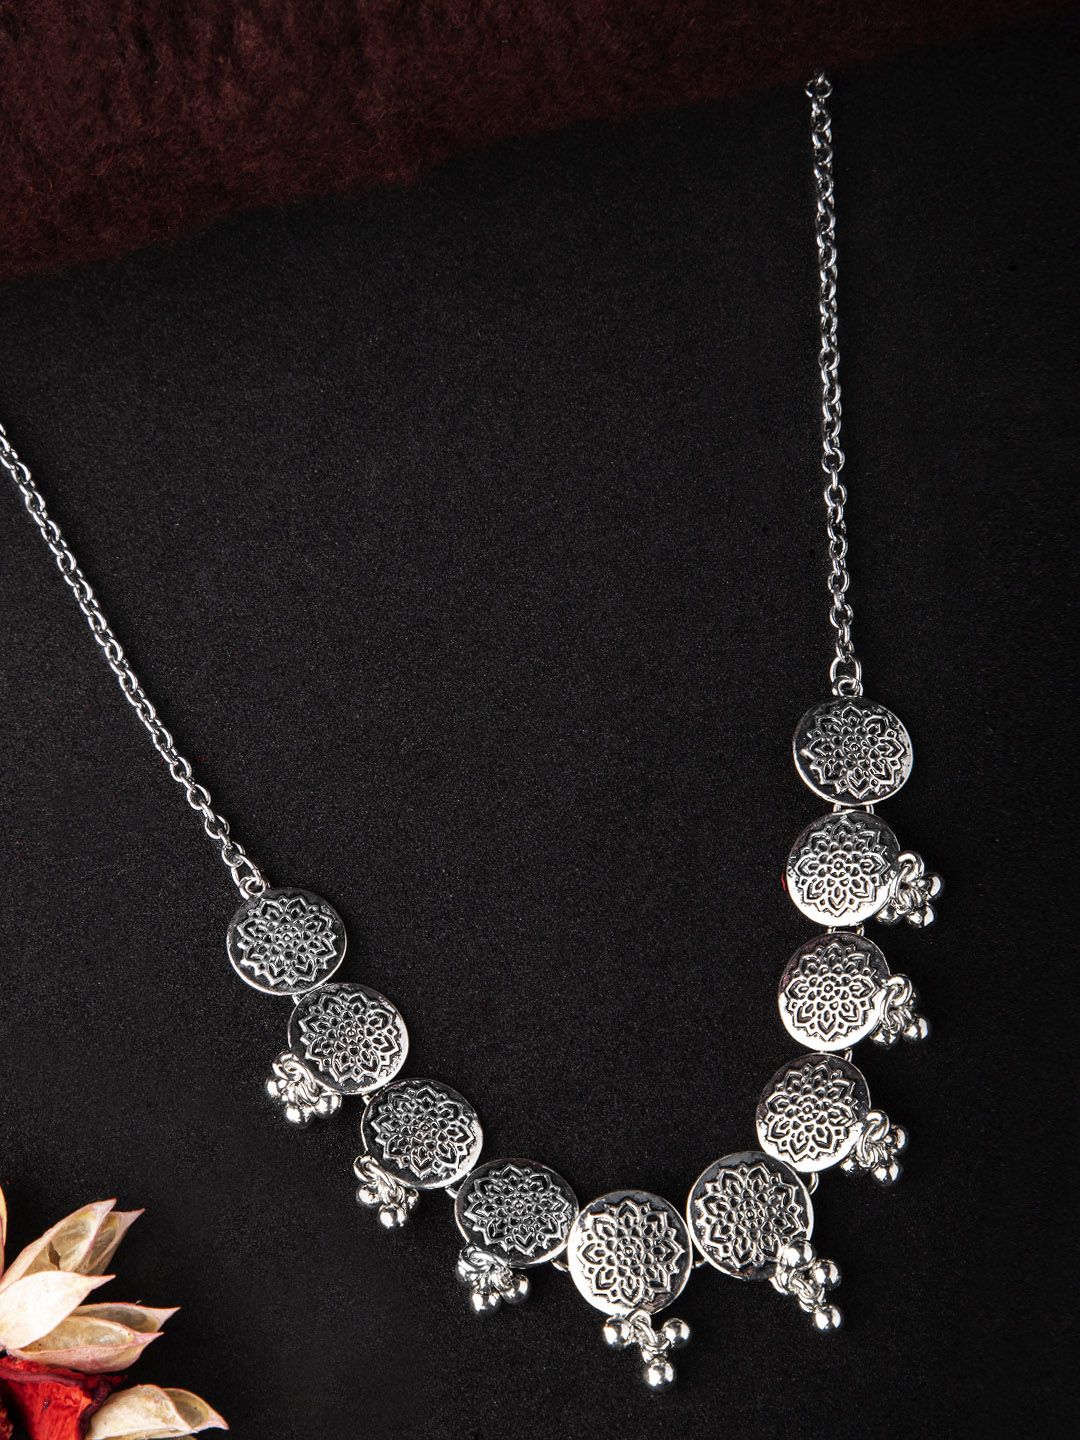 Rubans Oxidized Silver-Toned Hand Crafted Textured Floral Necklace Price in India